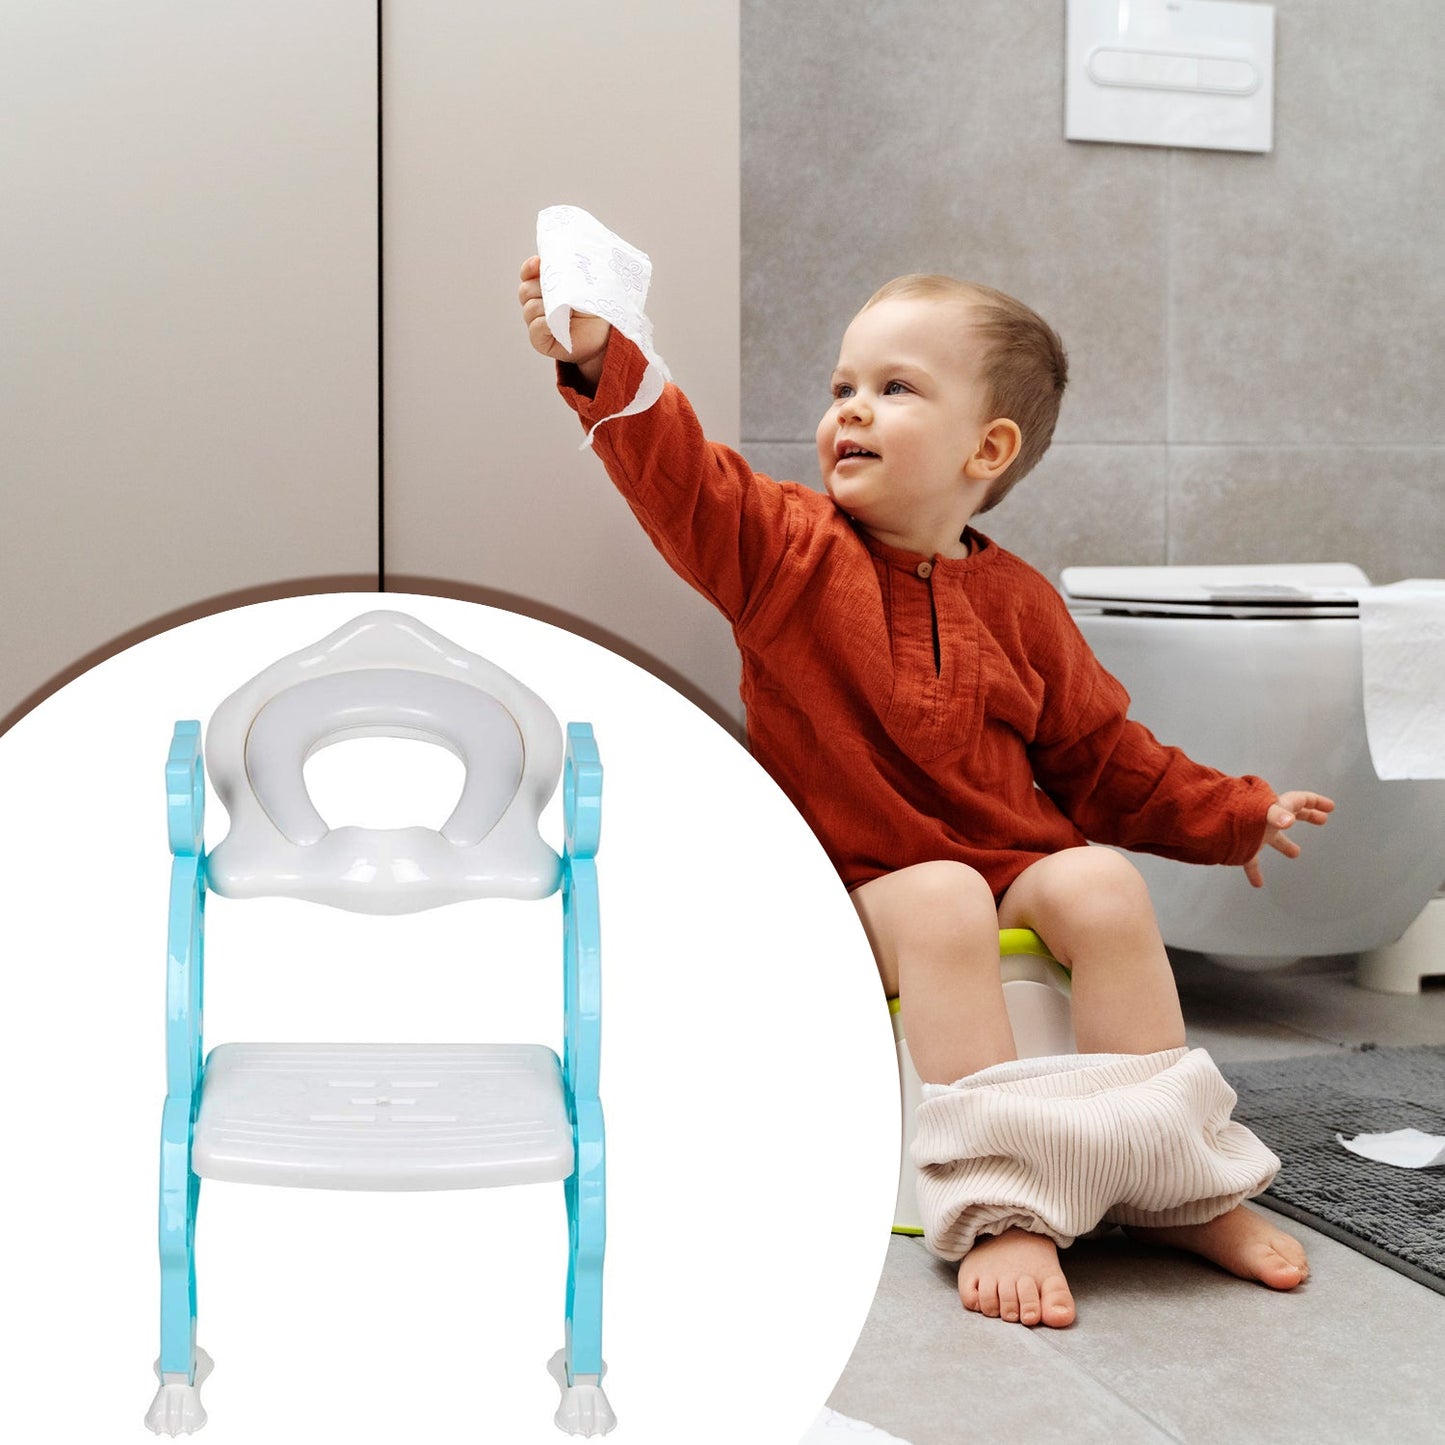 8492 2 In 1 Potty Training Toilet Seat with Step Stool Ladder for Boy and Girl Baby Toddler Kid Children’s Toilet Training Seat Chair with Soft Padded Seat and Sturdy Non-Slip Wide Step, Make Potty Easier For Your Kids (Multi-Color)